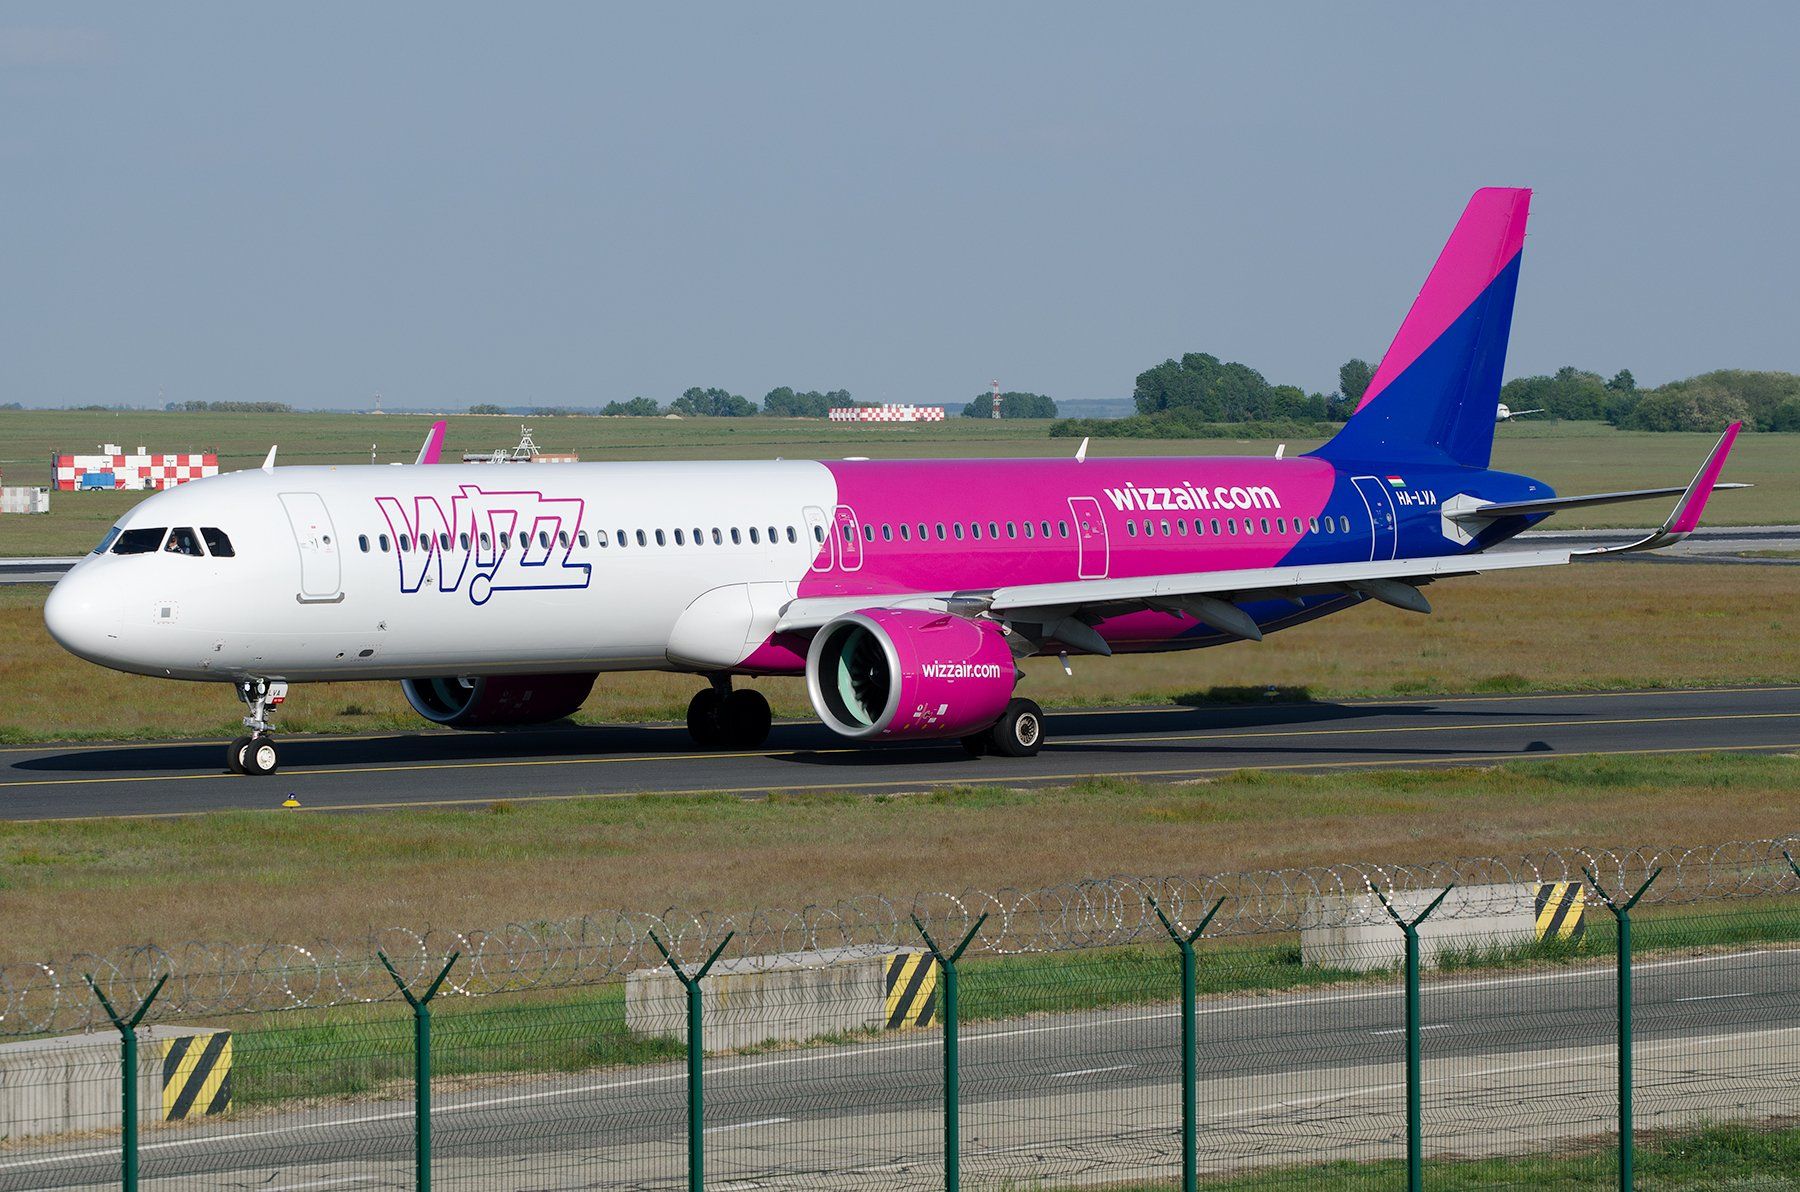 New Chisinau flight from Budapest Airport on Wizz Air